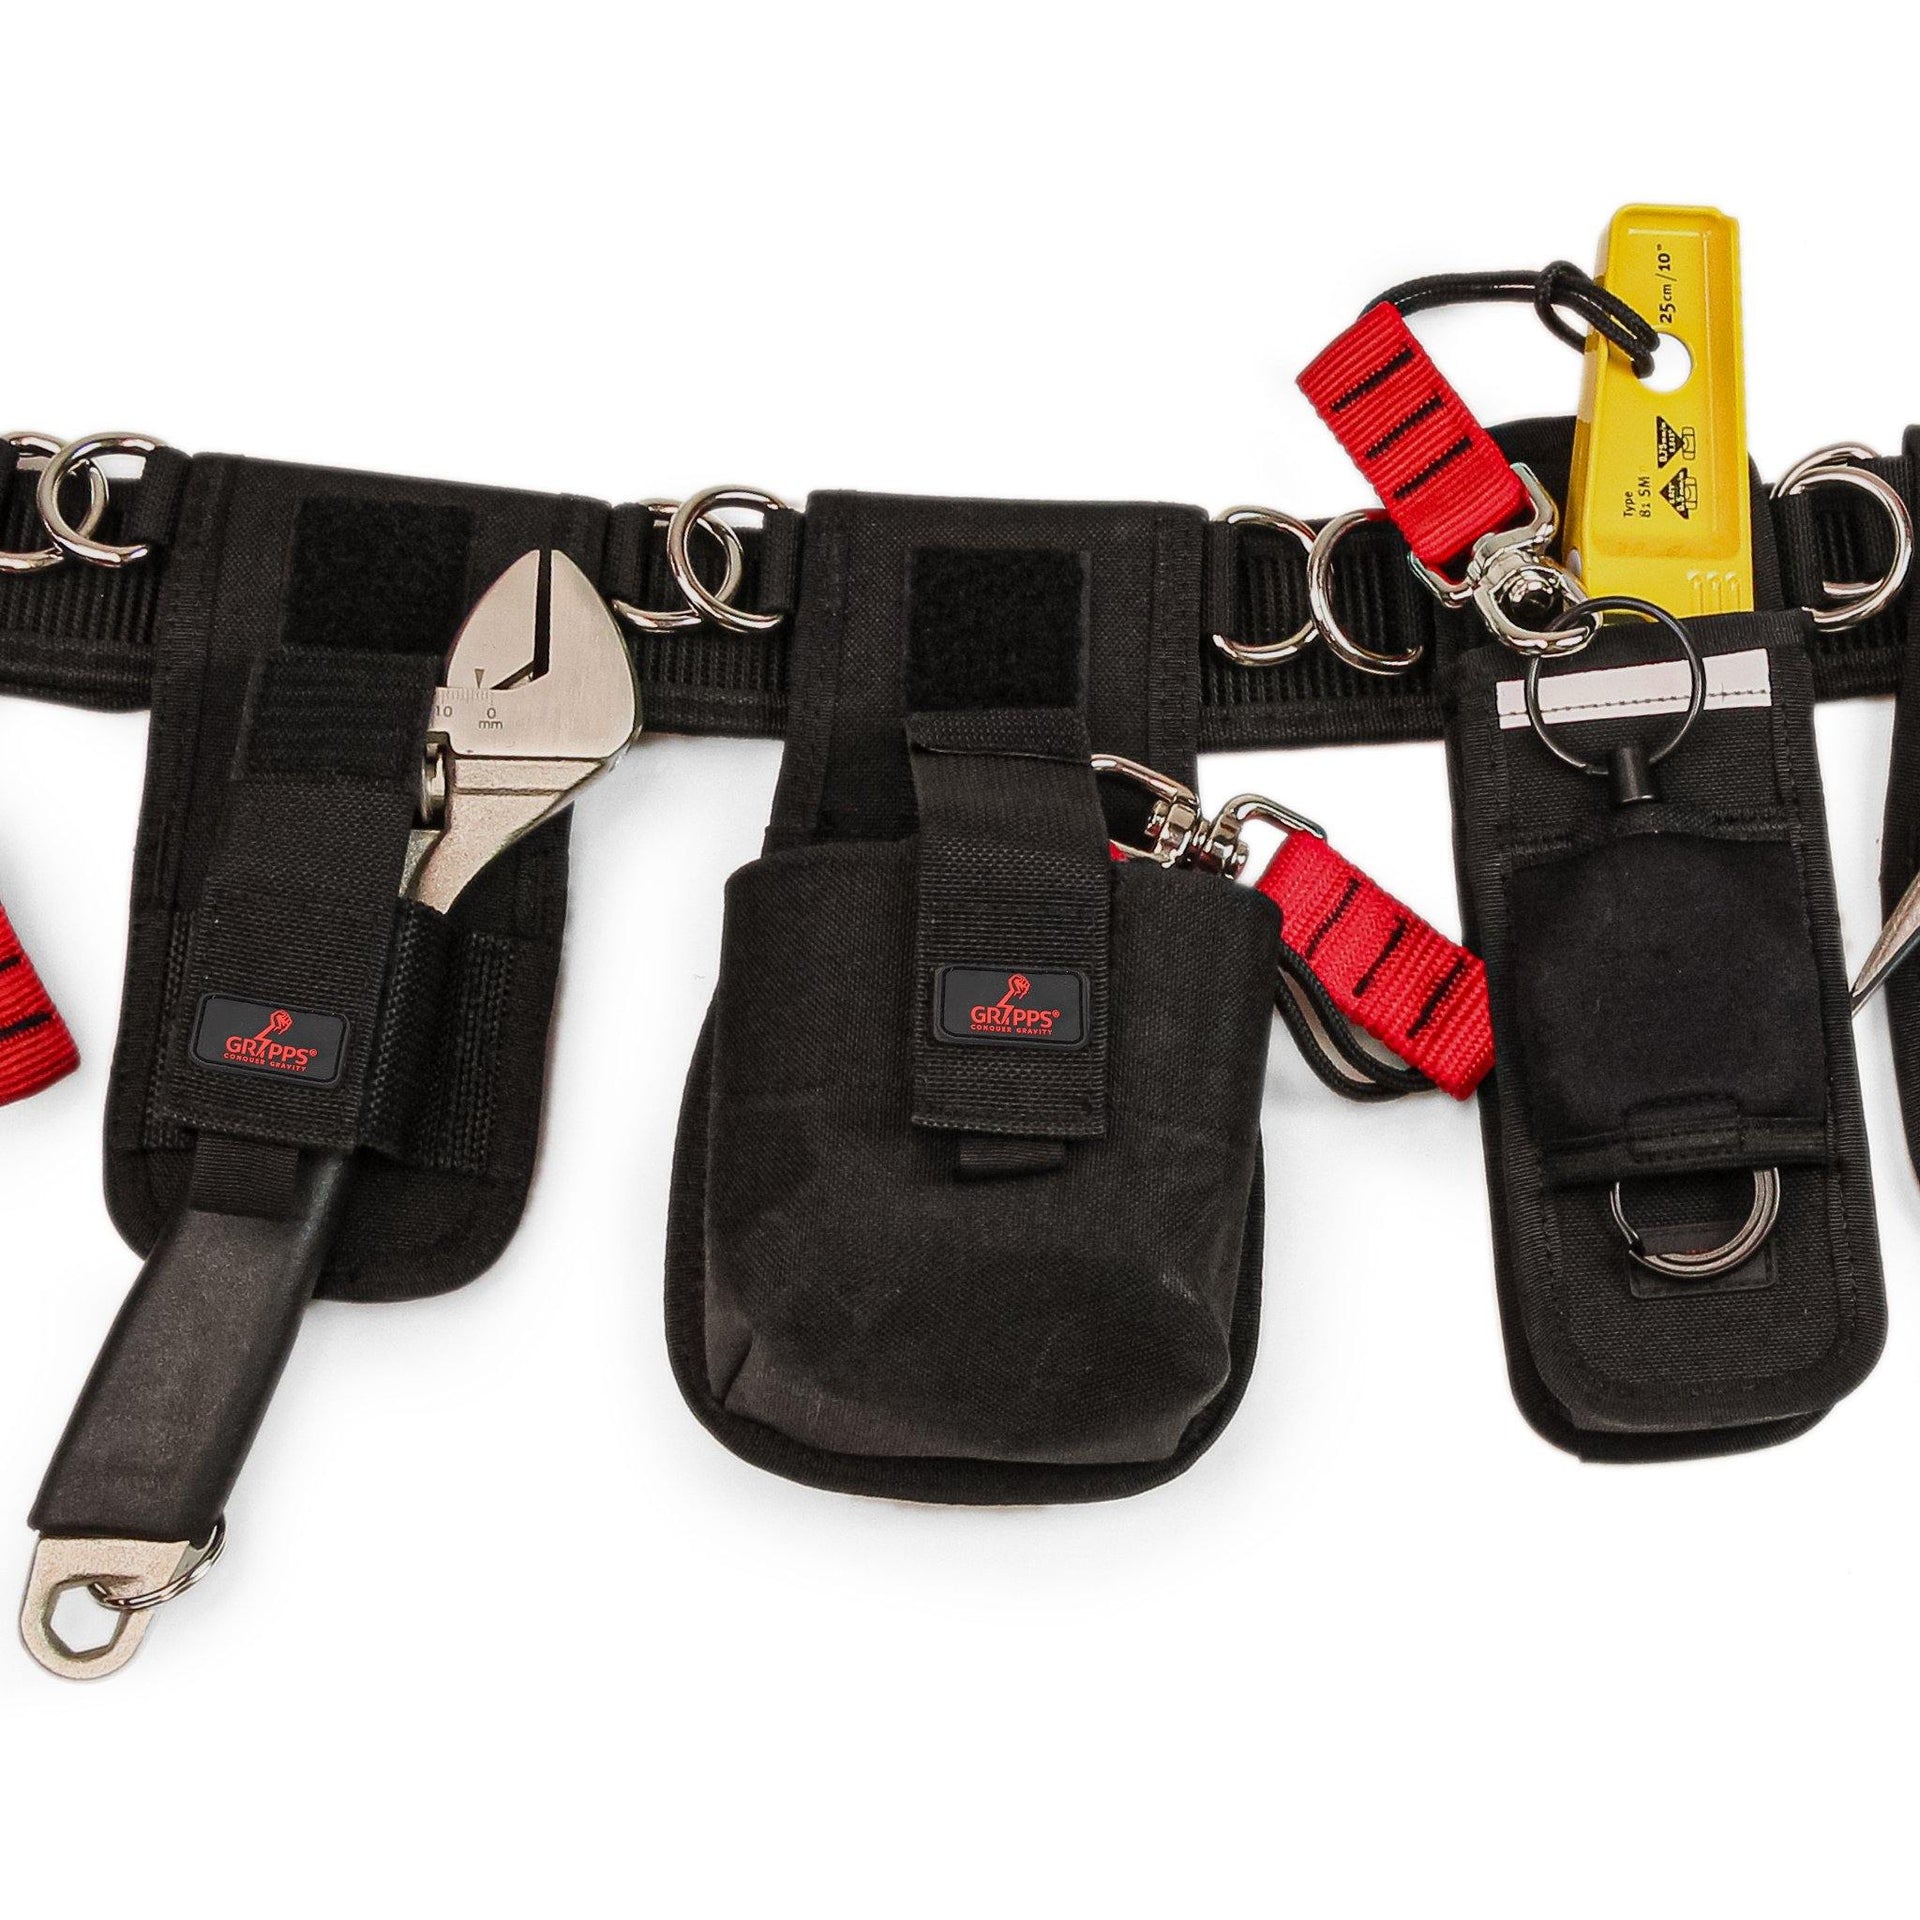 Tool Belts & Holsters - GRIPPS Global